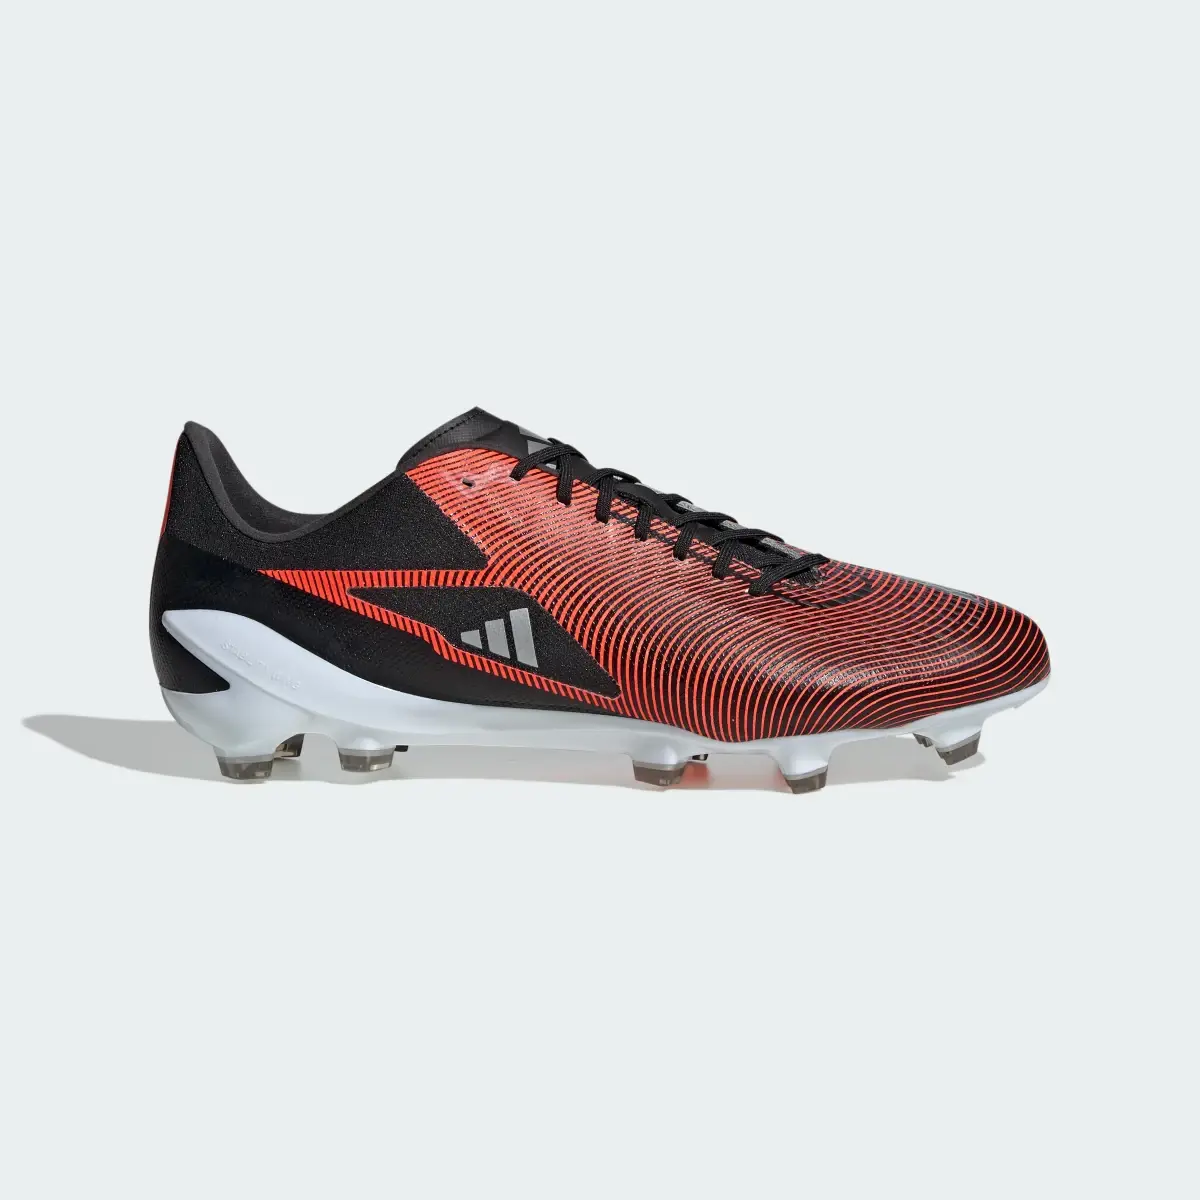 Adidas Adizero RS15 Pro Firm Ground Rugby Boots. 2